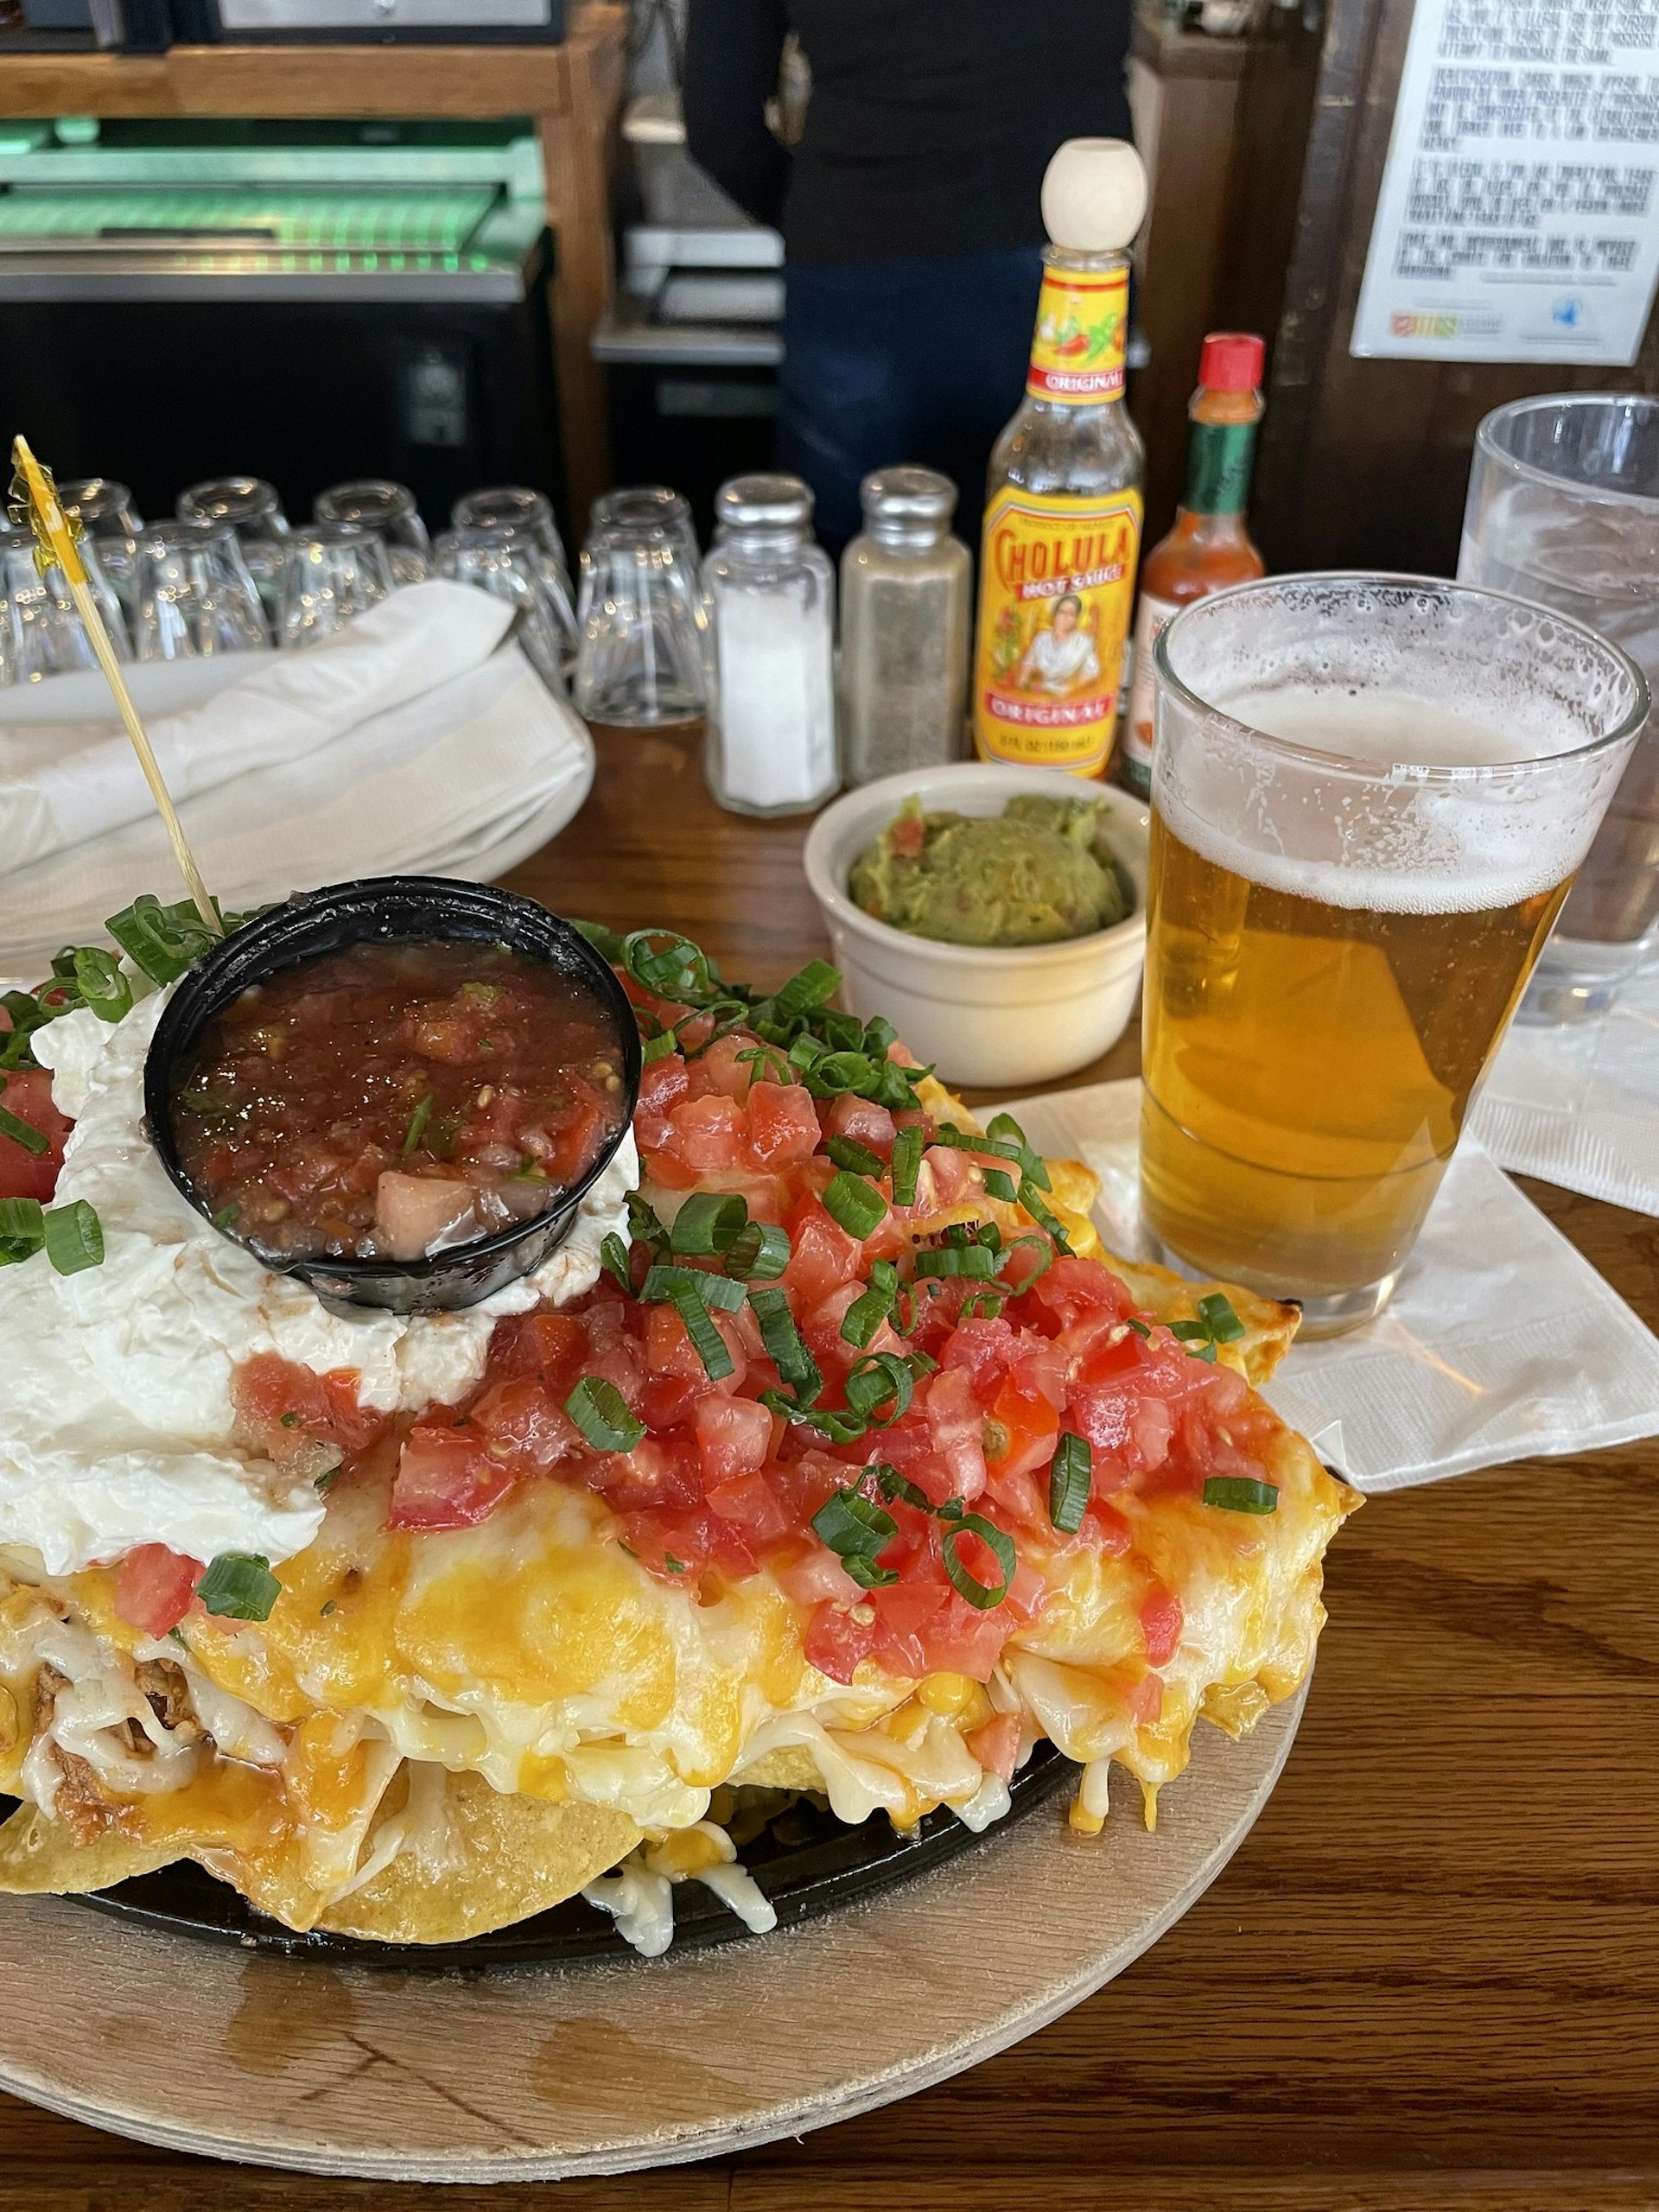 Plate of nachos and beer at the Red Lion